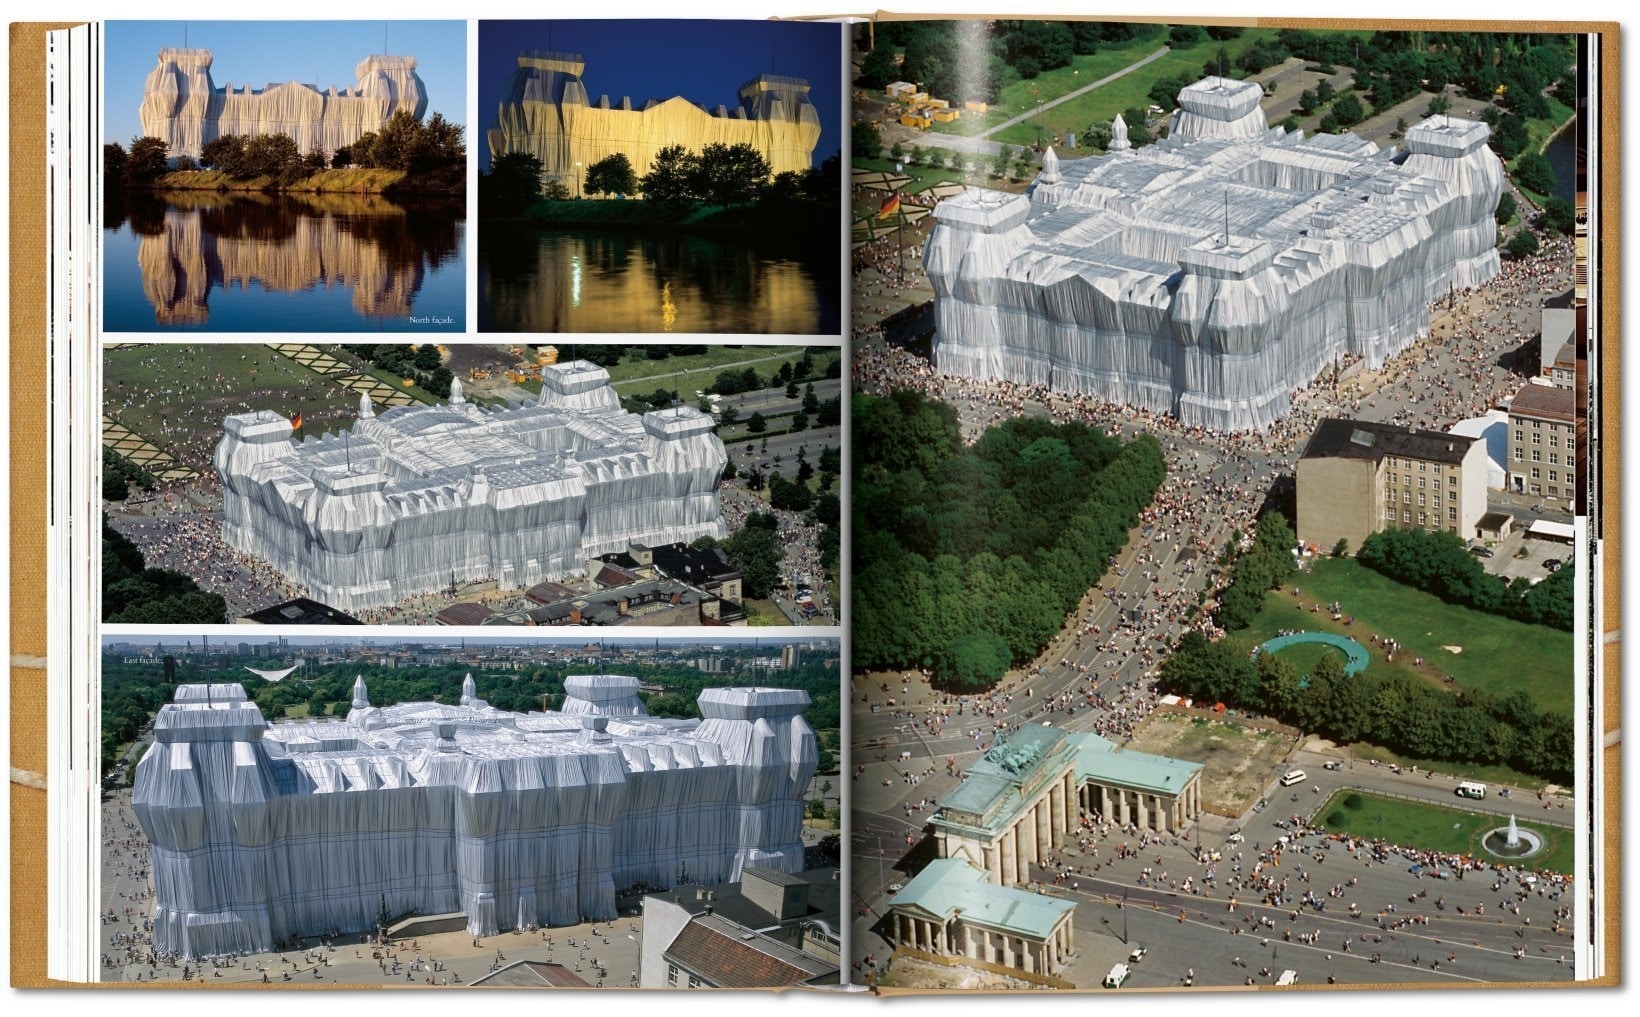 christo-and-jeanne-claude-updated-edition-5